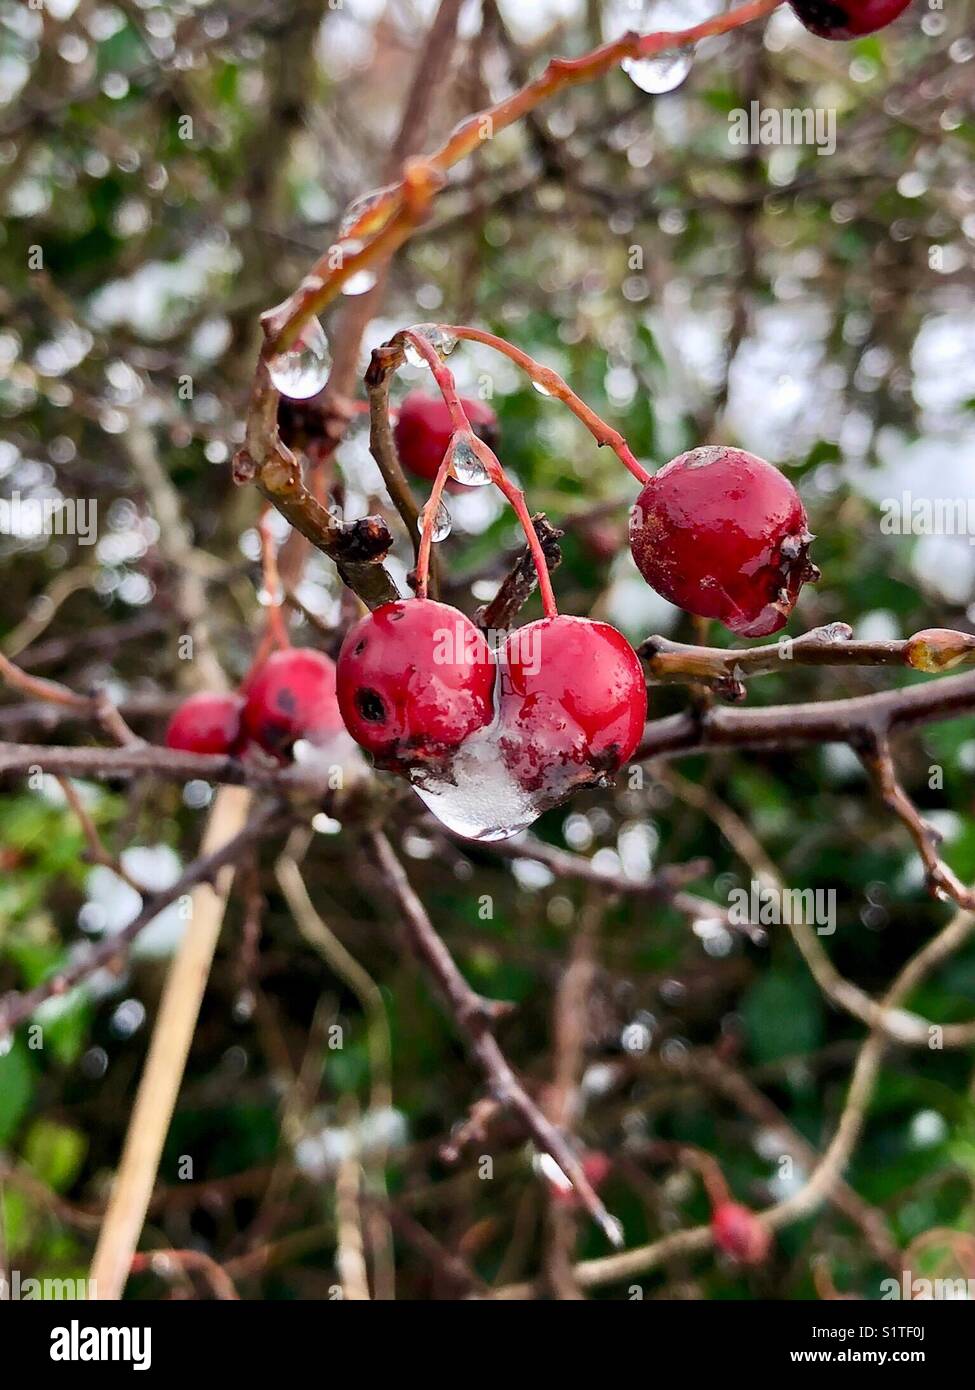 Melting snow on red hawthorn seeds Stock Photo